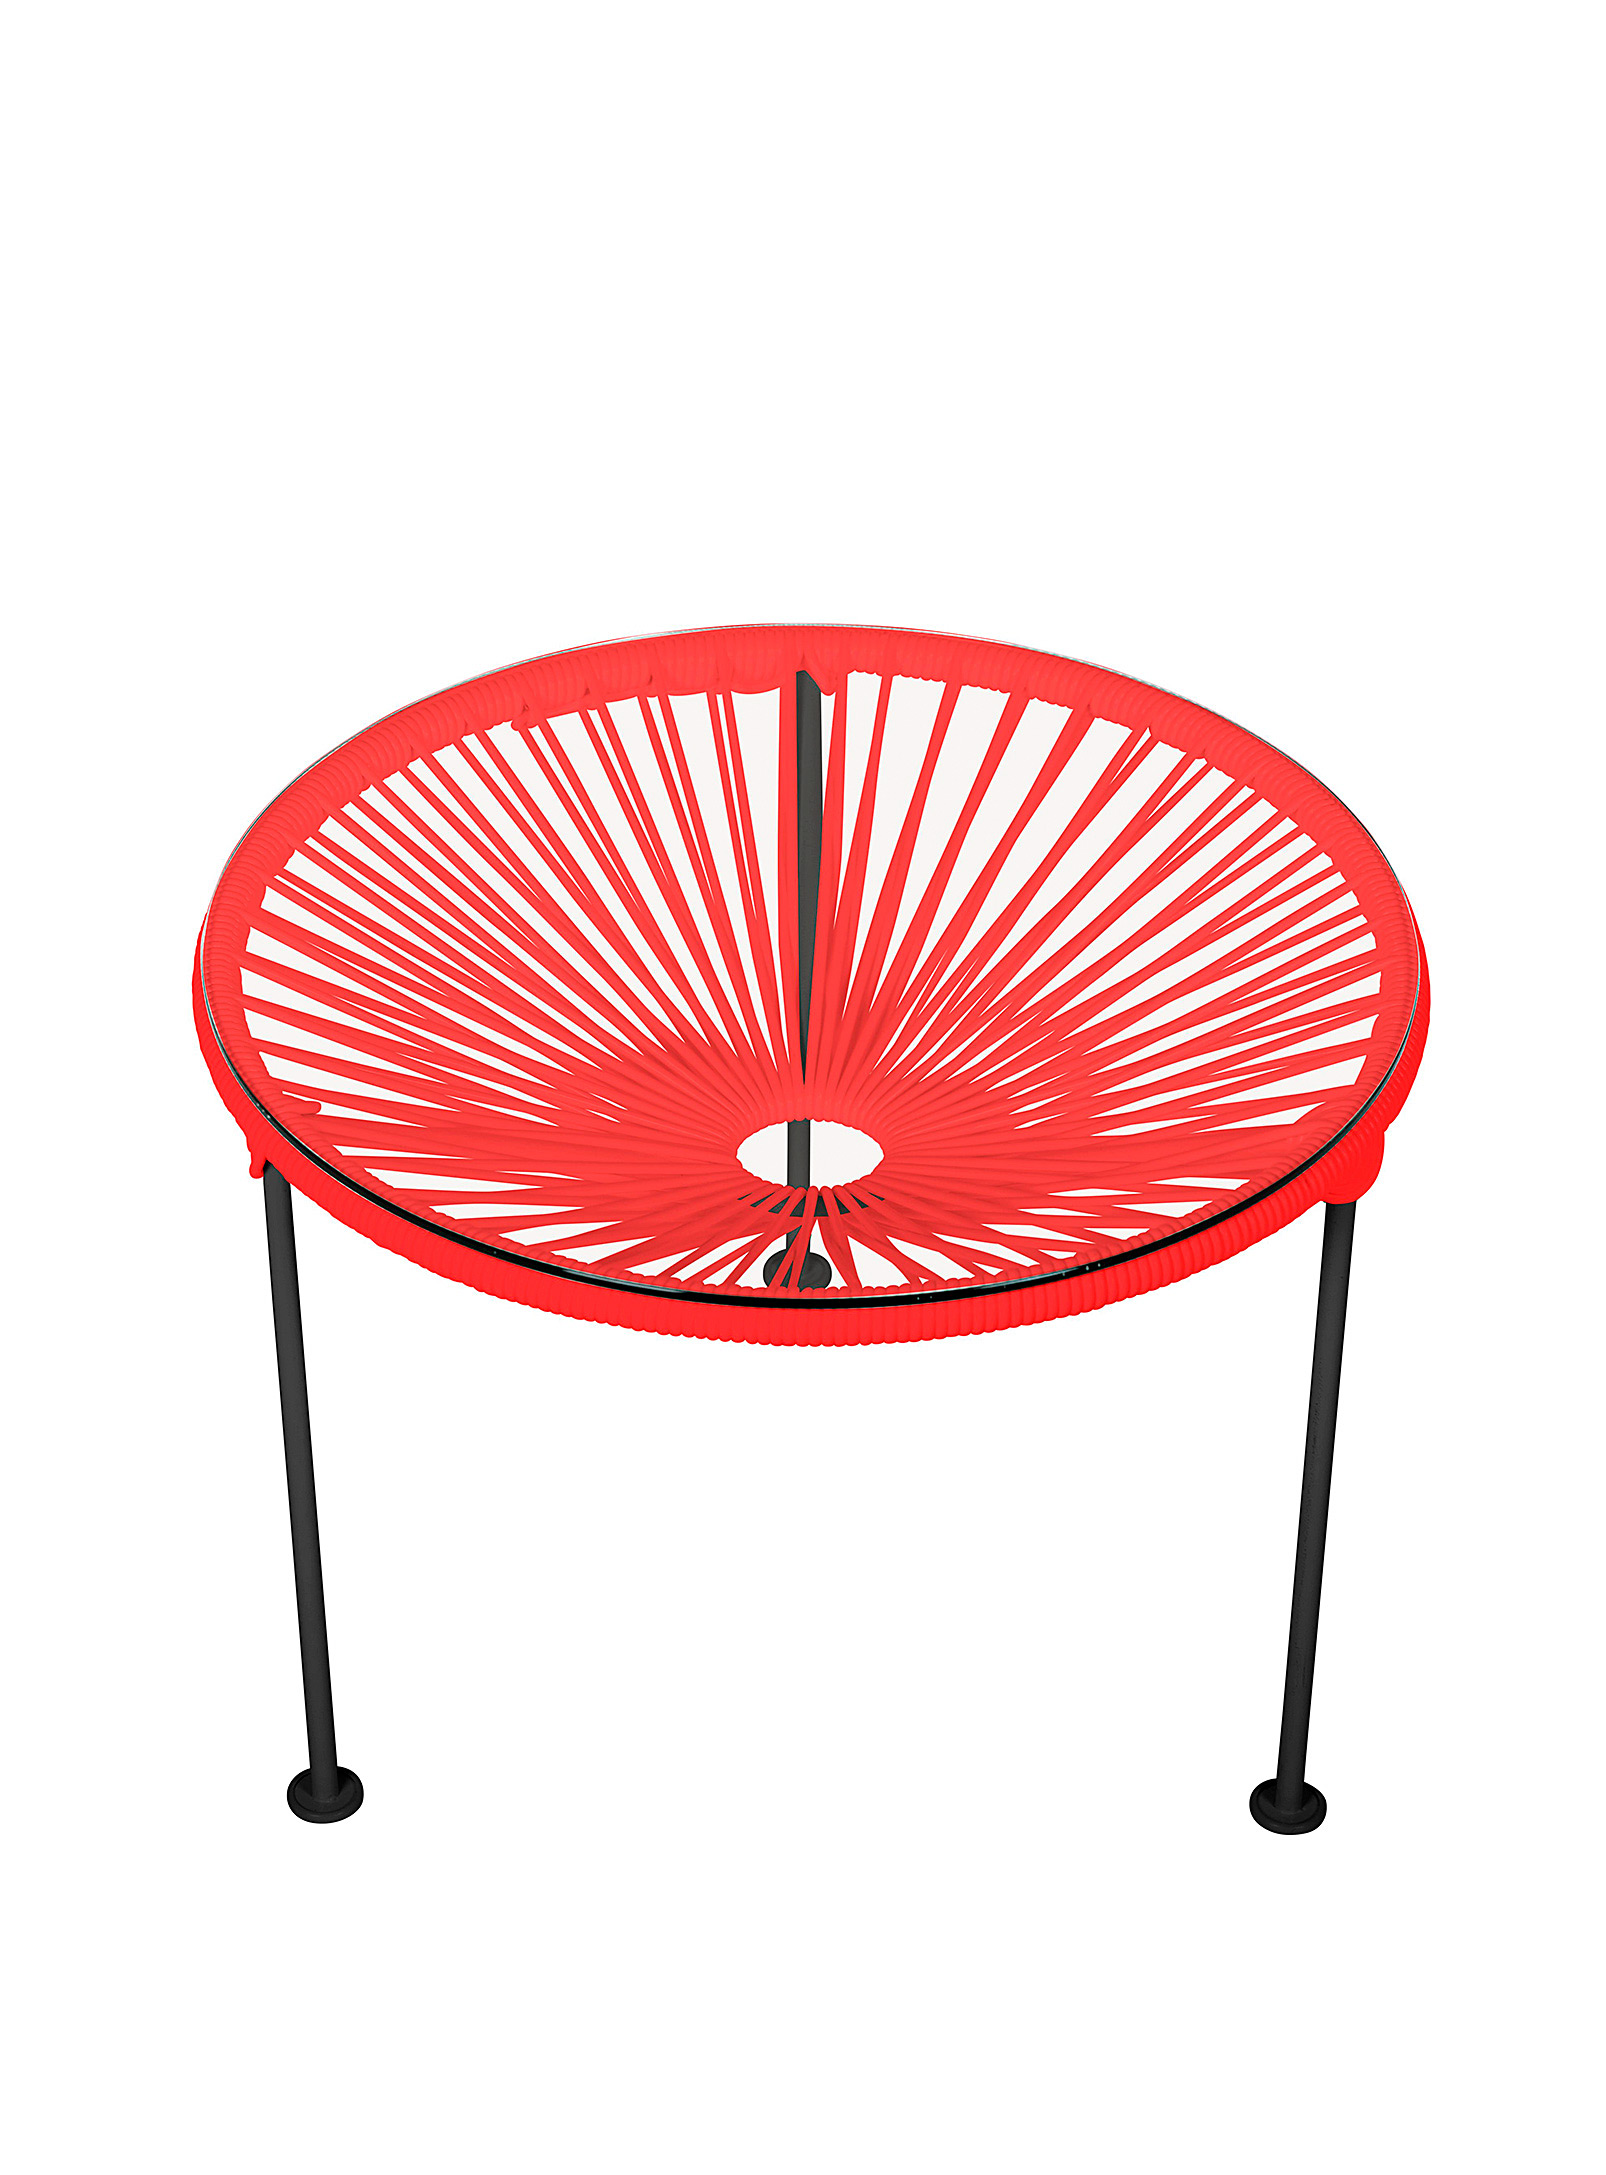 Simons Maison Zicatela Outdoor Table In Red